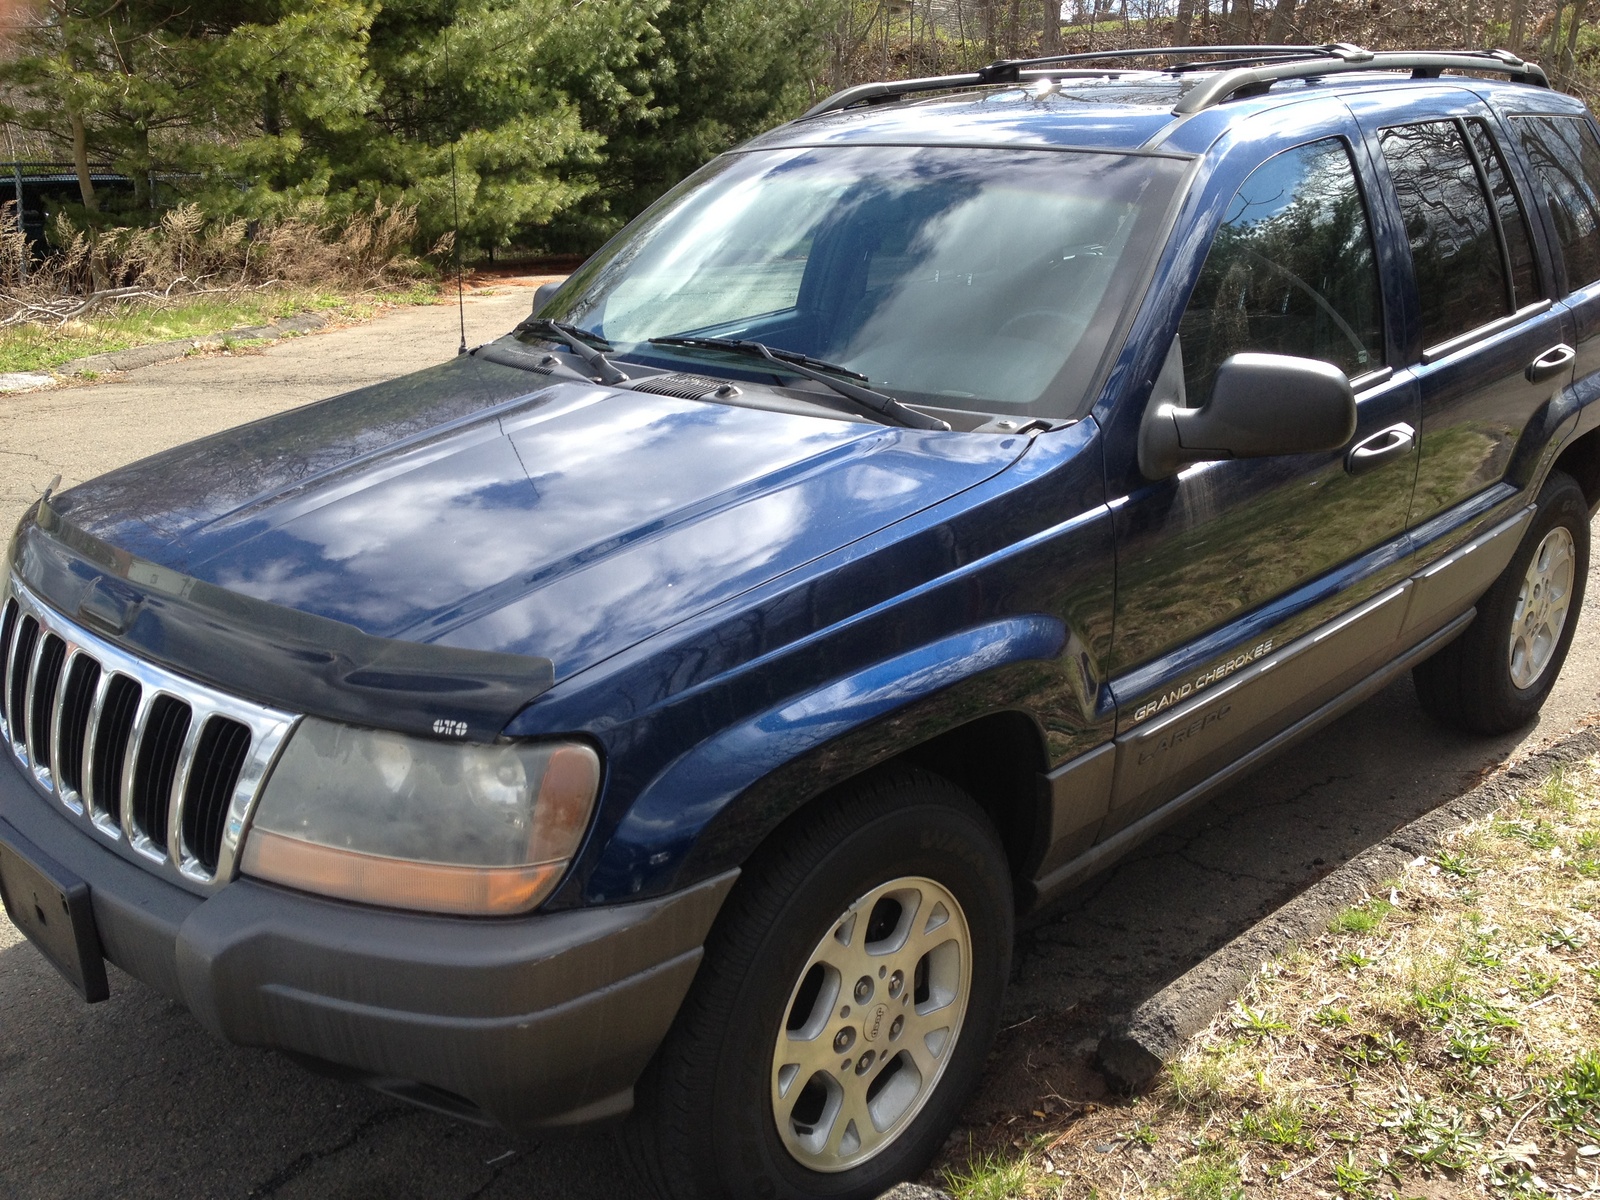 2001 Jeep grand cherokee transmission issues #1